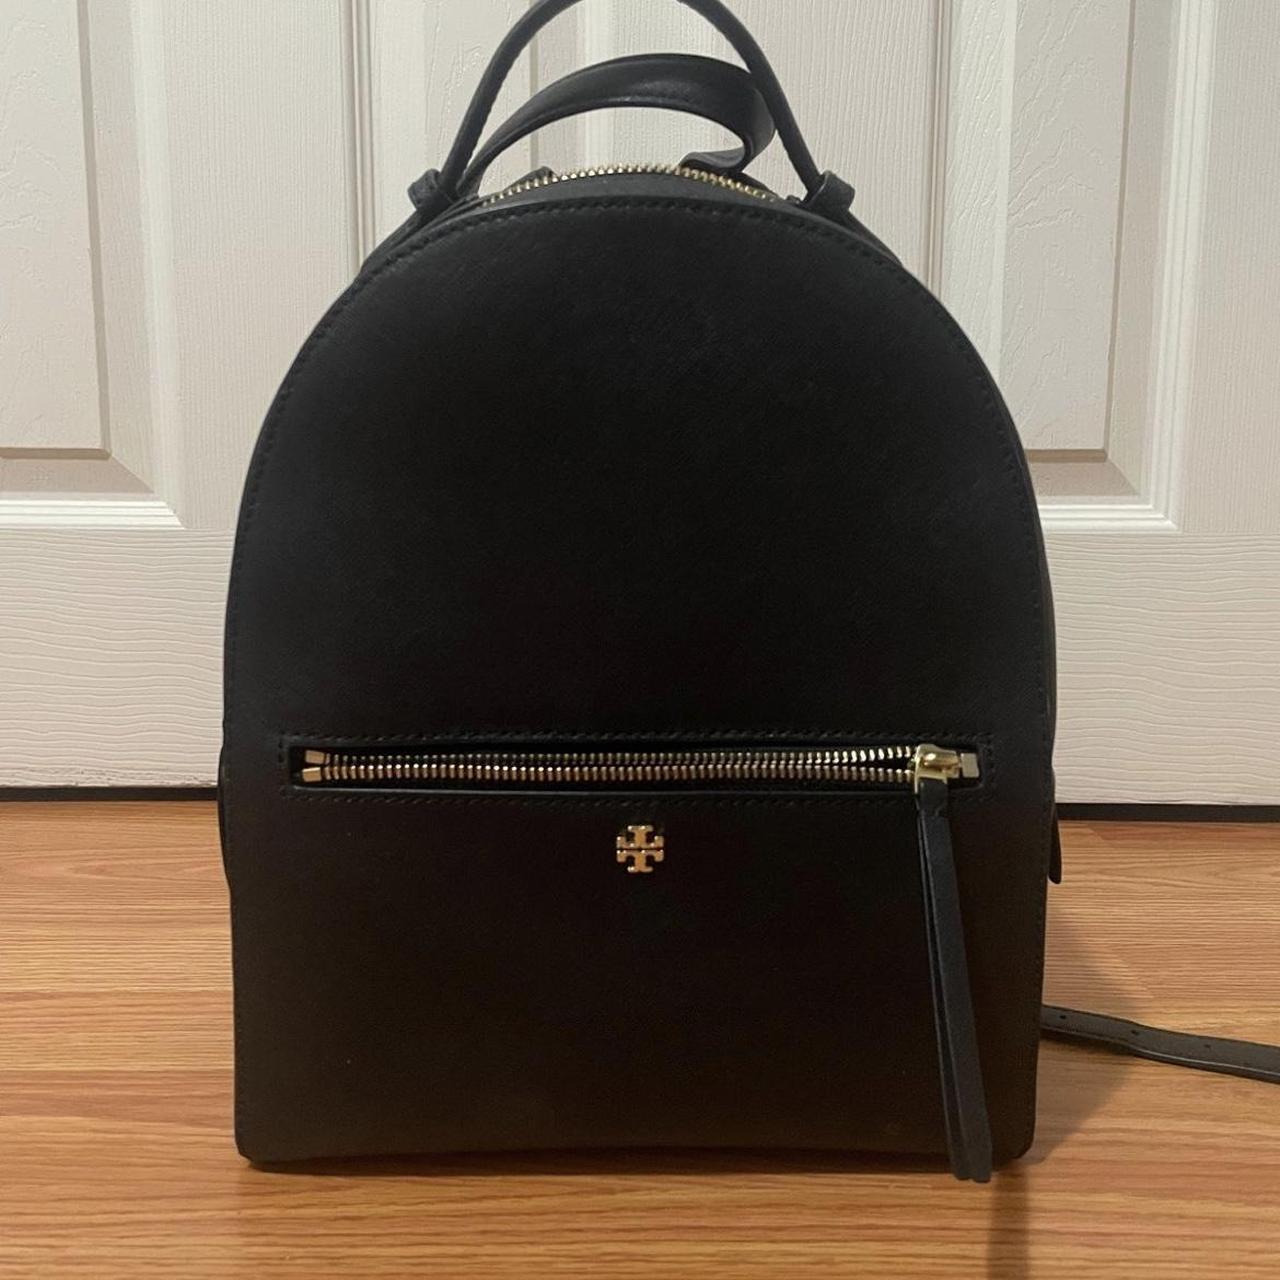 Tory Burch Emerson Structured Black Leather Satchel